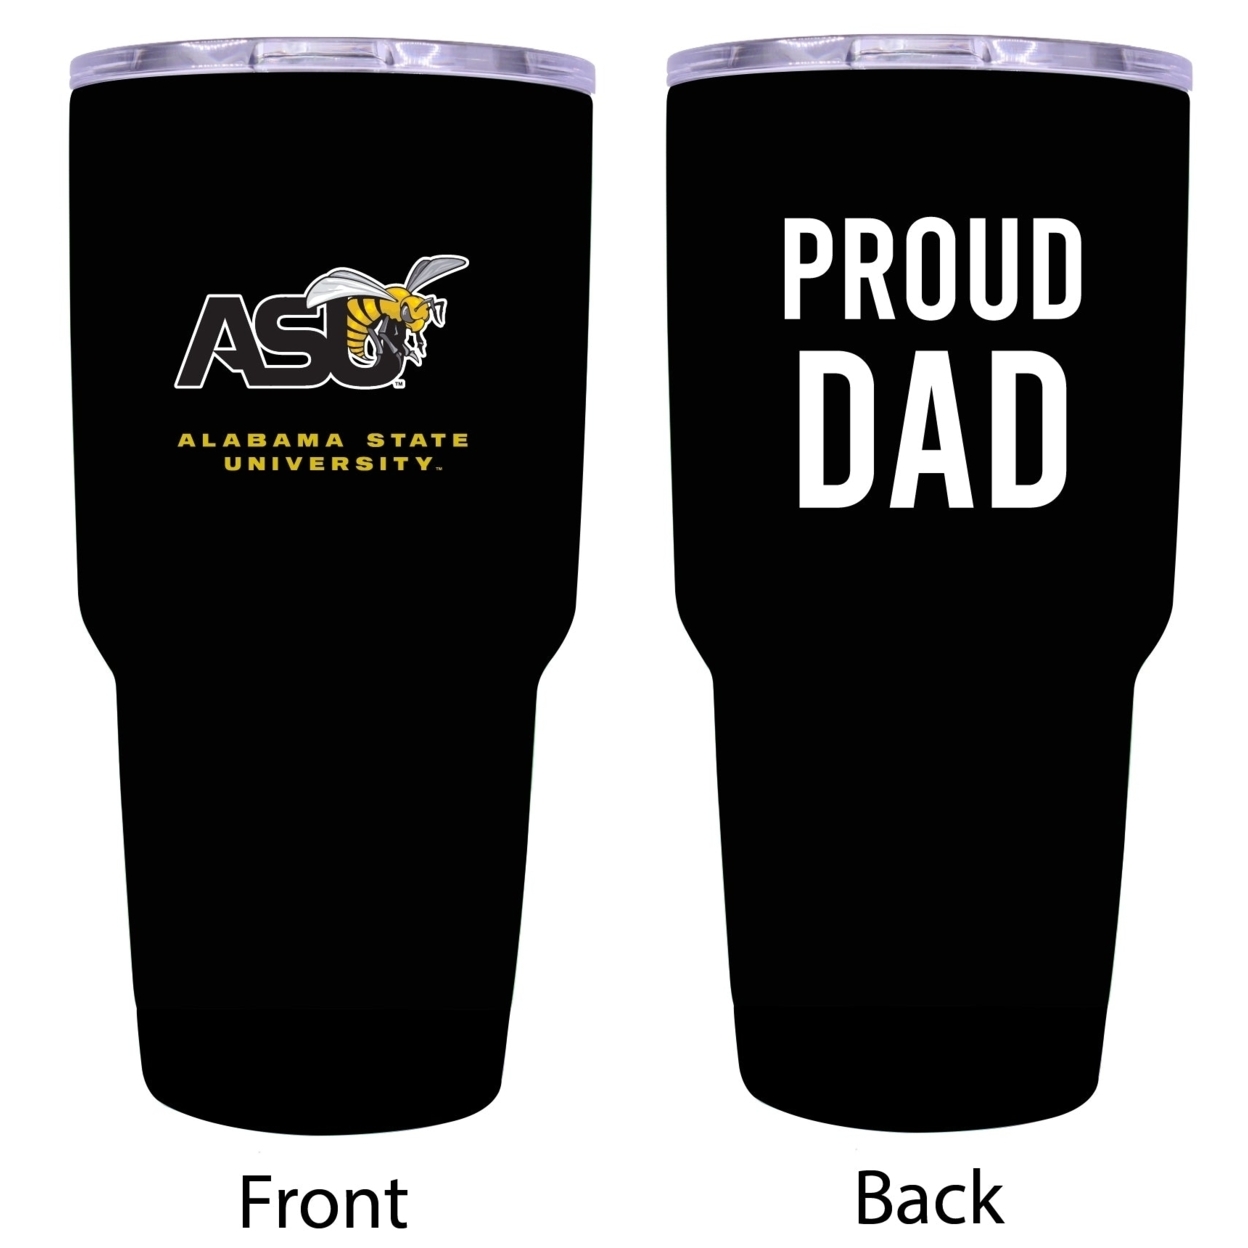 R And R Imports Alabama State University Proud Dad 24 Oz Insulated Stainless Steel Tumblers Black.